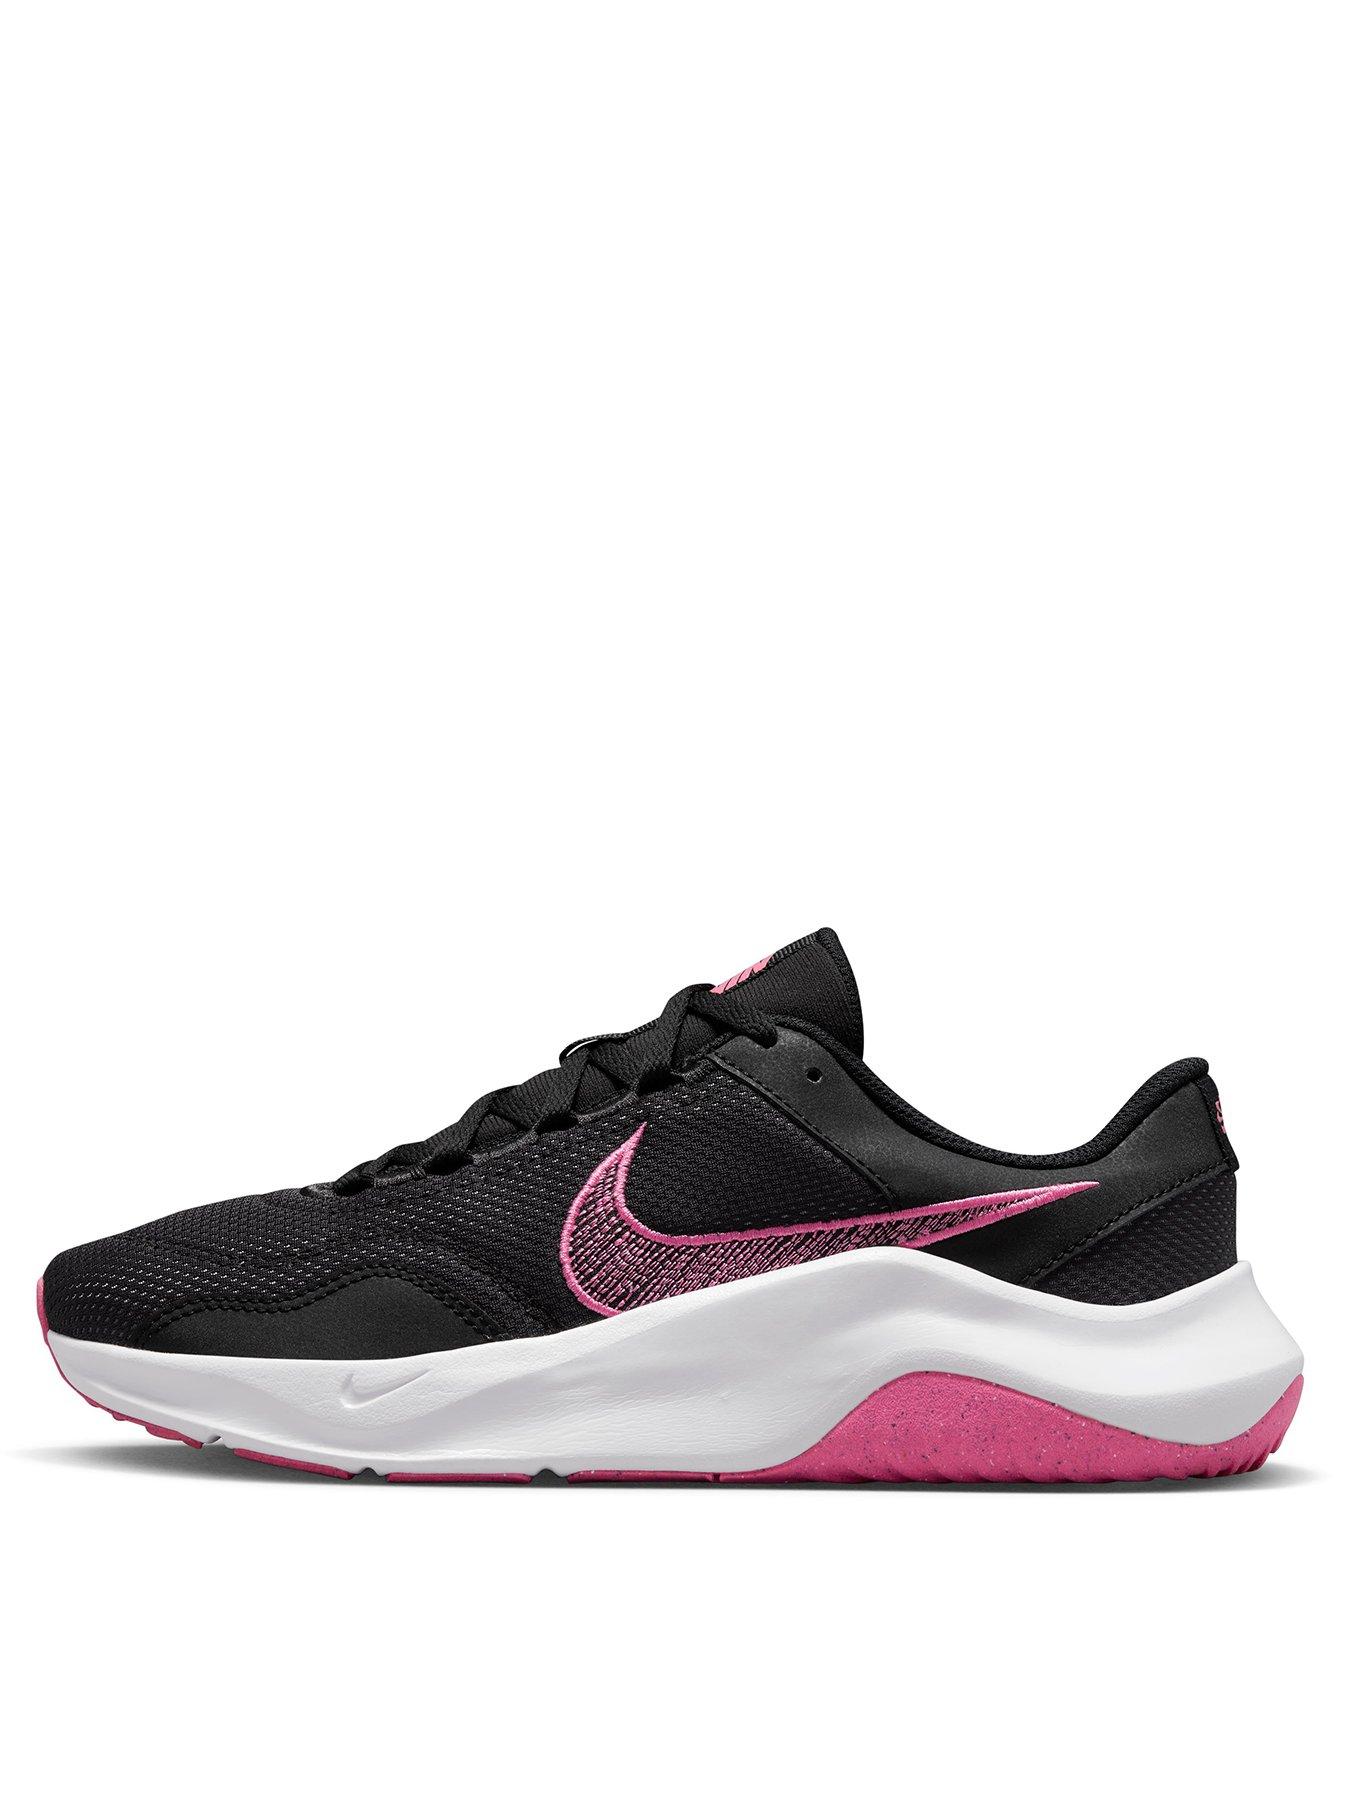 Shop Women's Shoes | Runners Trainers | Very Ireland